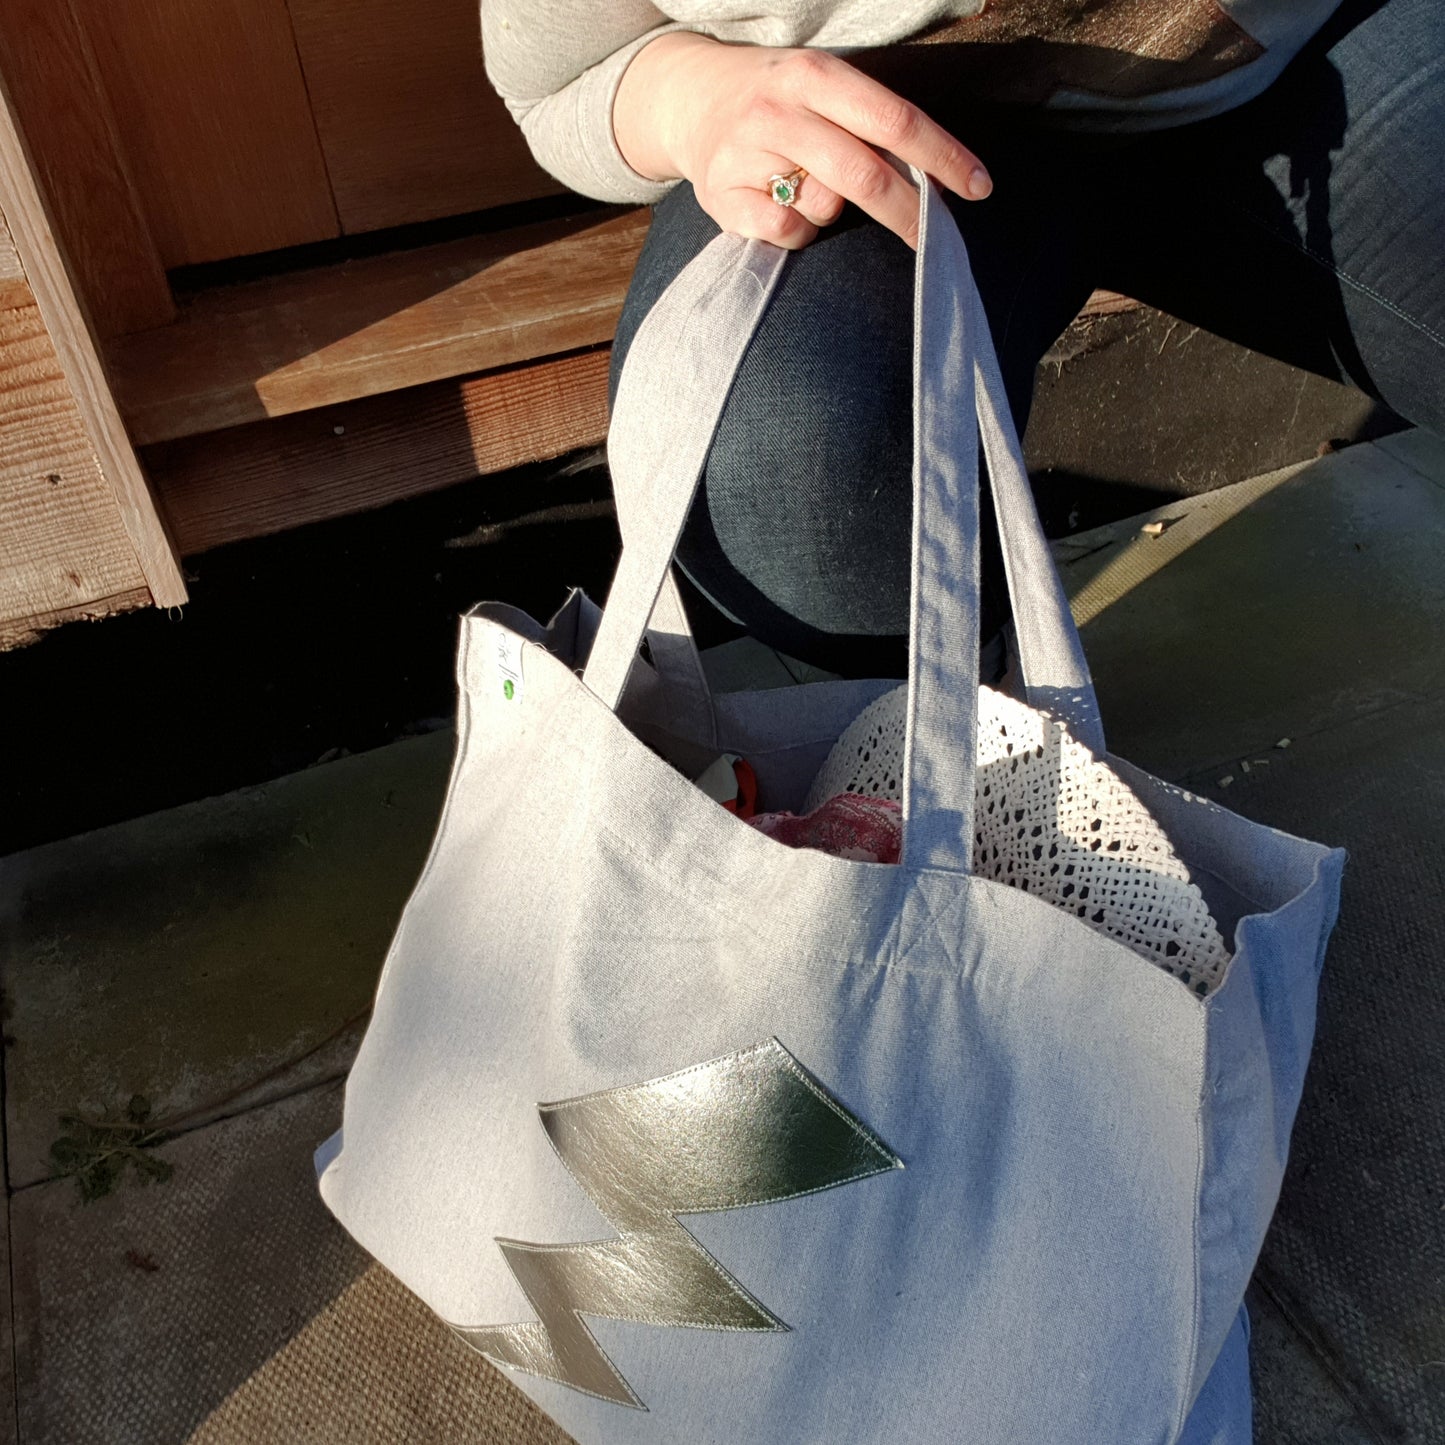 STRONG OVERSIZED RECYCLED SHOPPER BAG